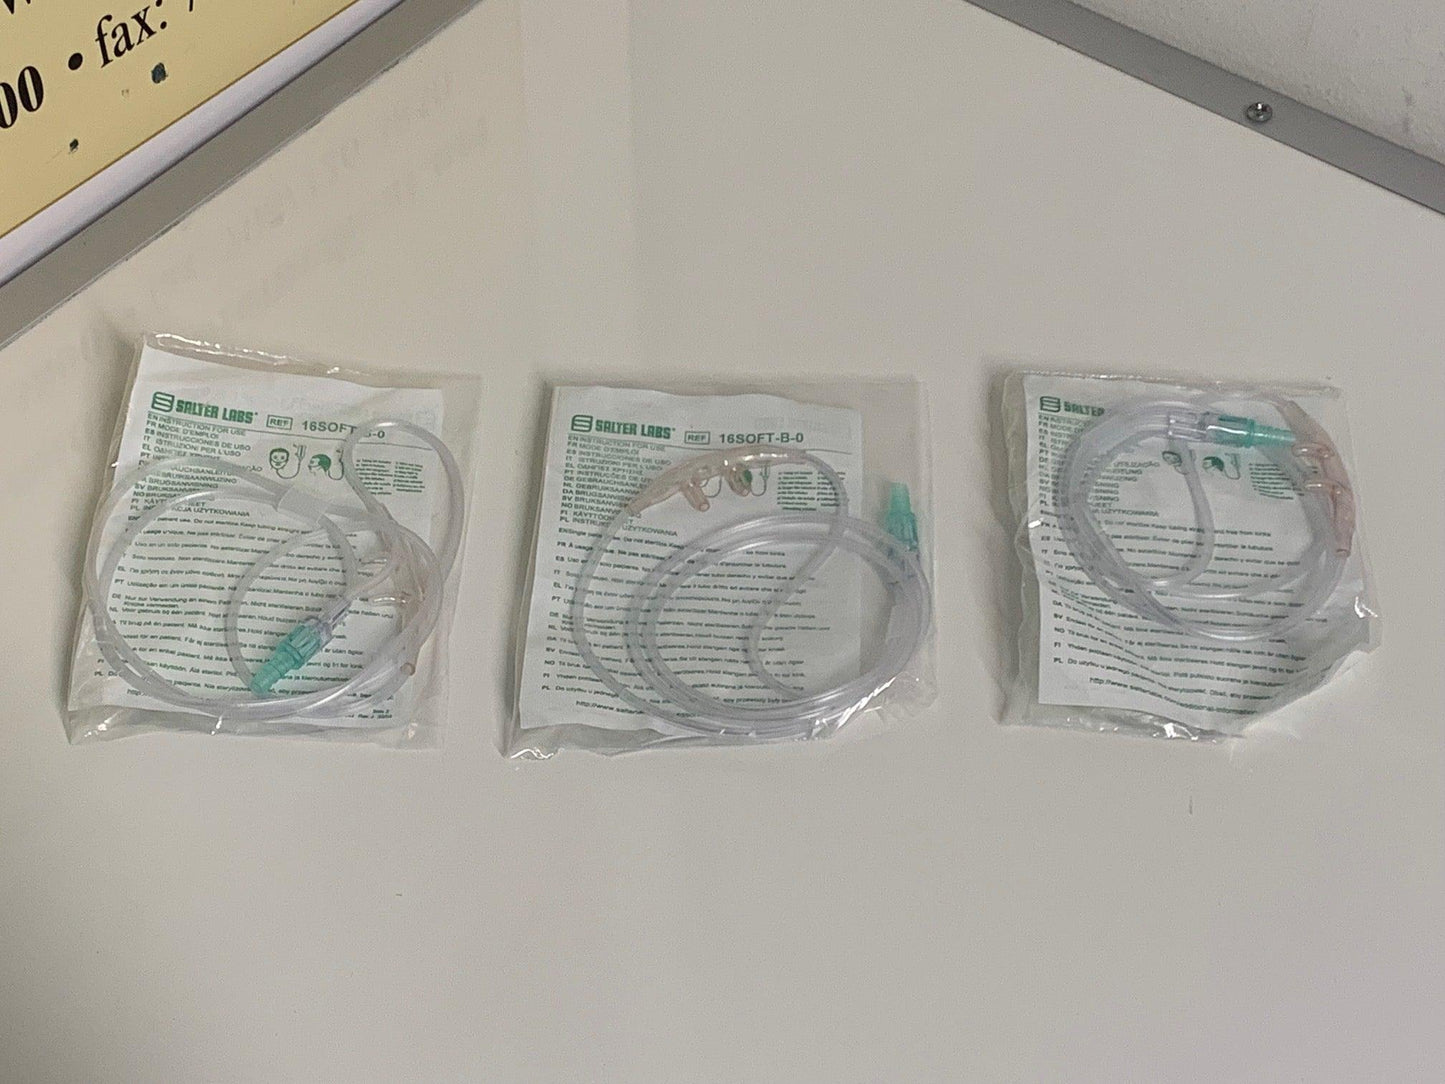 NEW Lot of 3 Salter Labs Adult 4' Soft Oxygen Nasal Cannula with Barbed Connector 16SOFT-B-0 - MBR Medicals